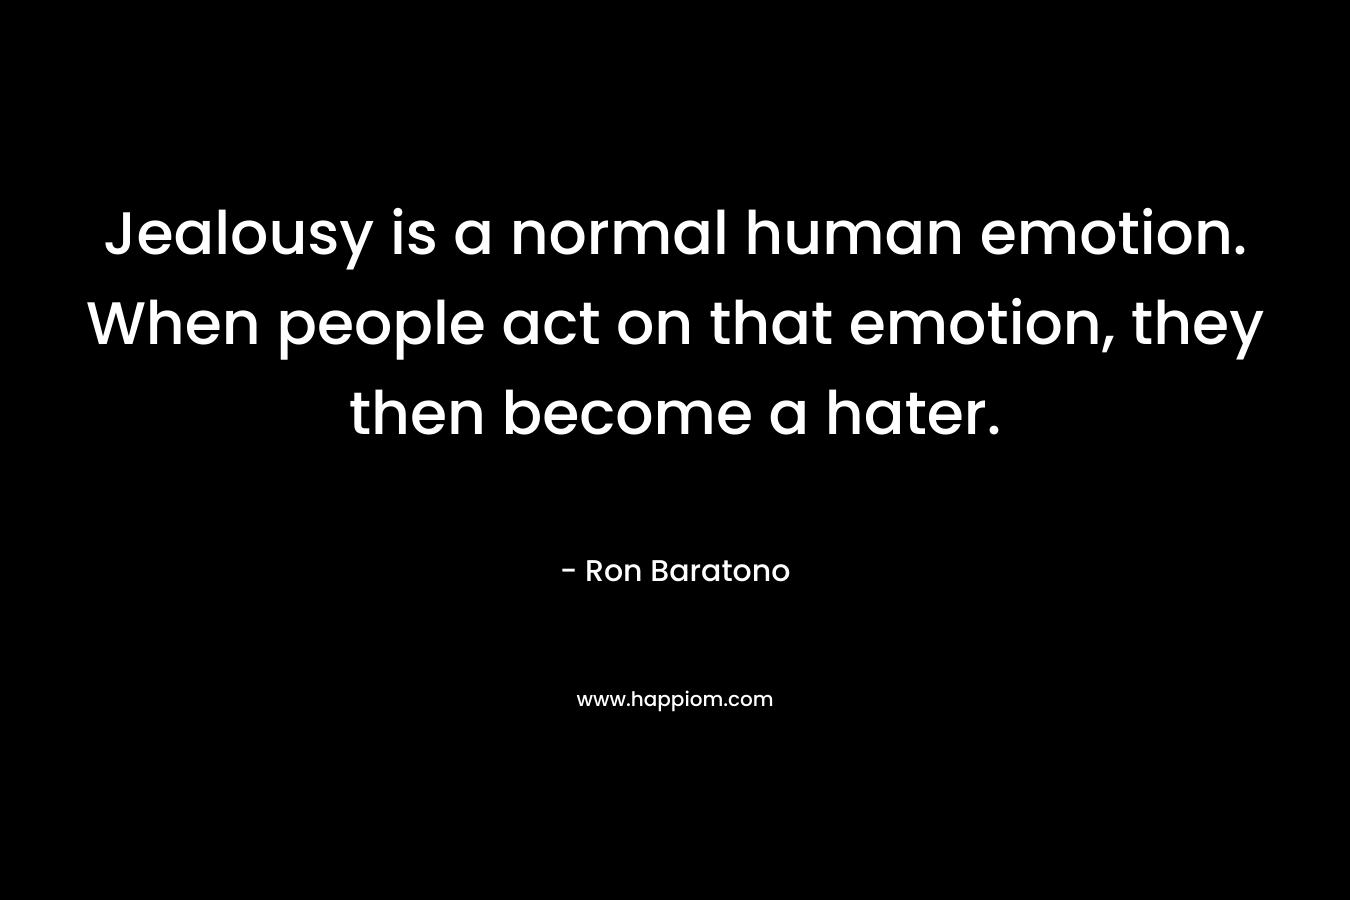 Jealousy is a normal human emotion. When people act on that emotion, they then become a hater.